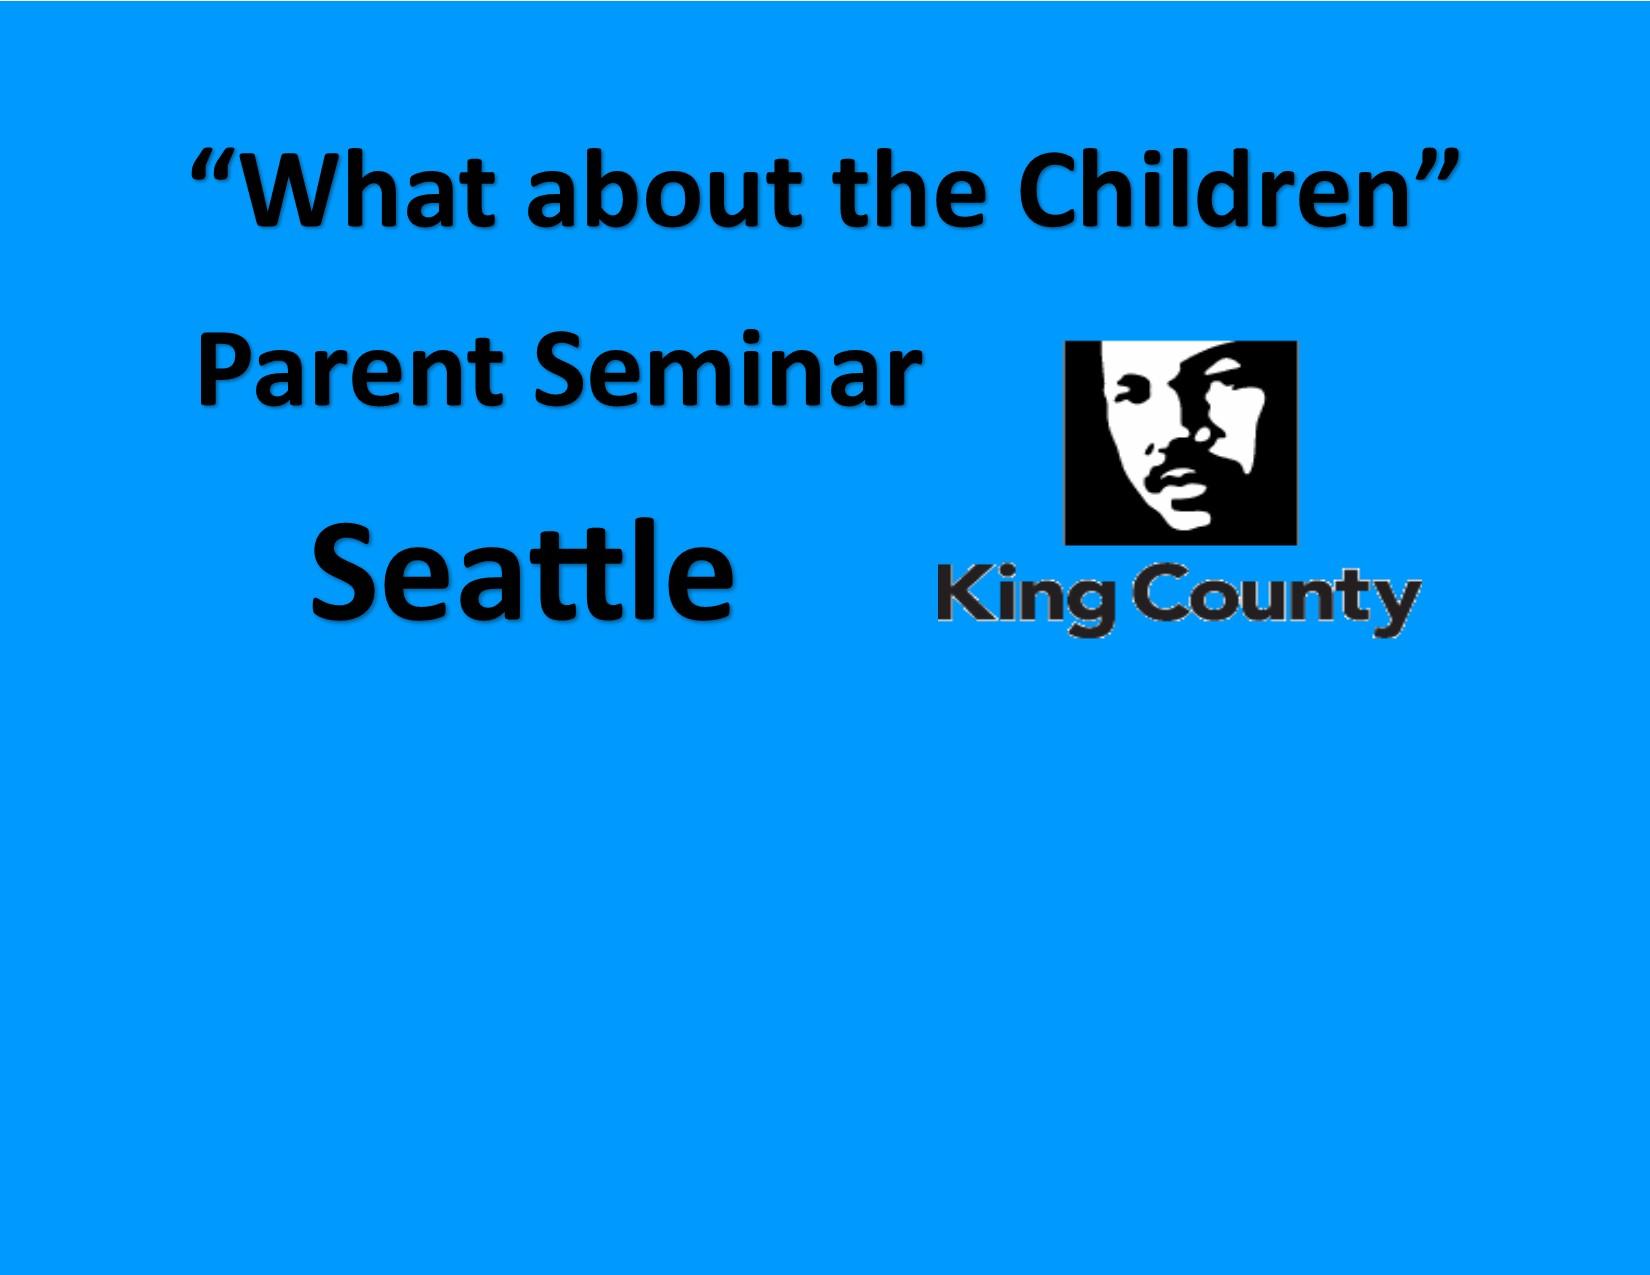 Parent Seminar What about the children? - Seattle - King County 